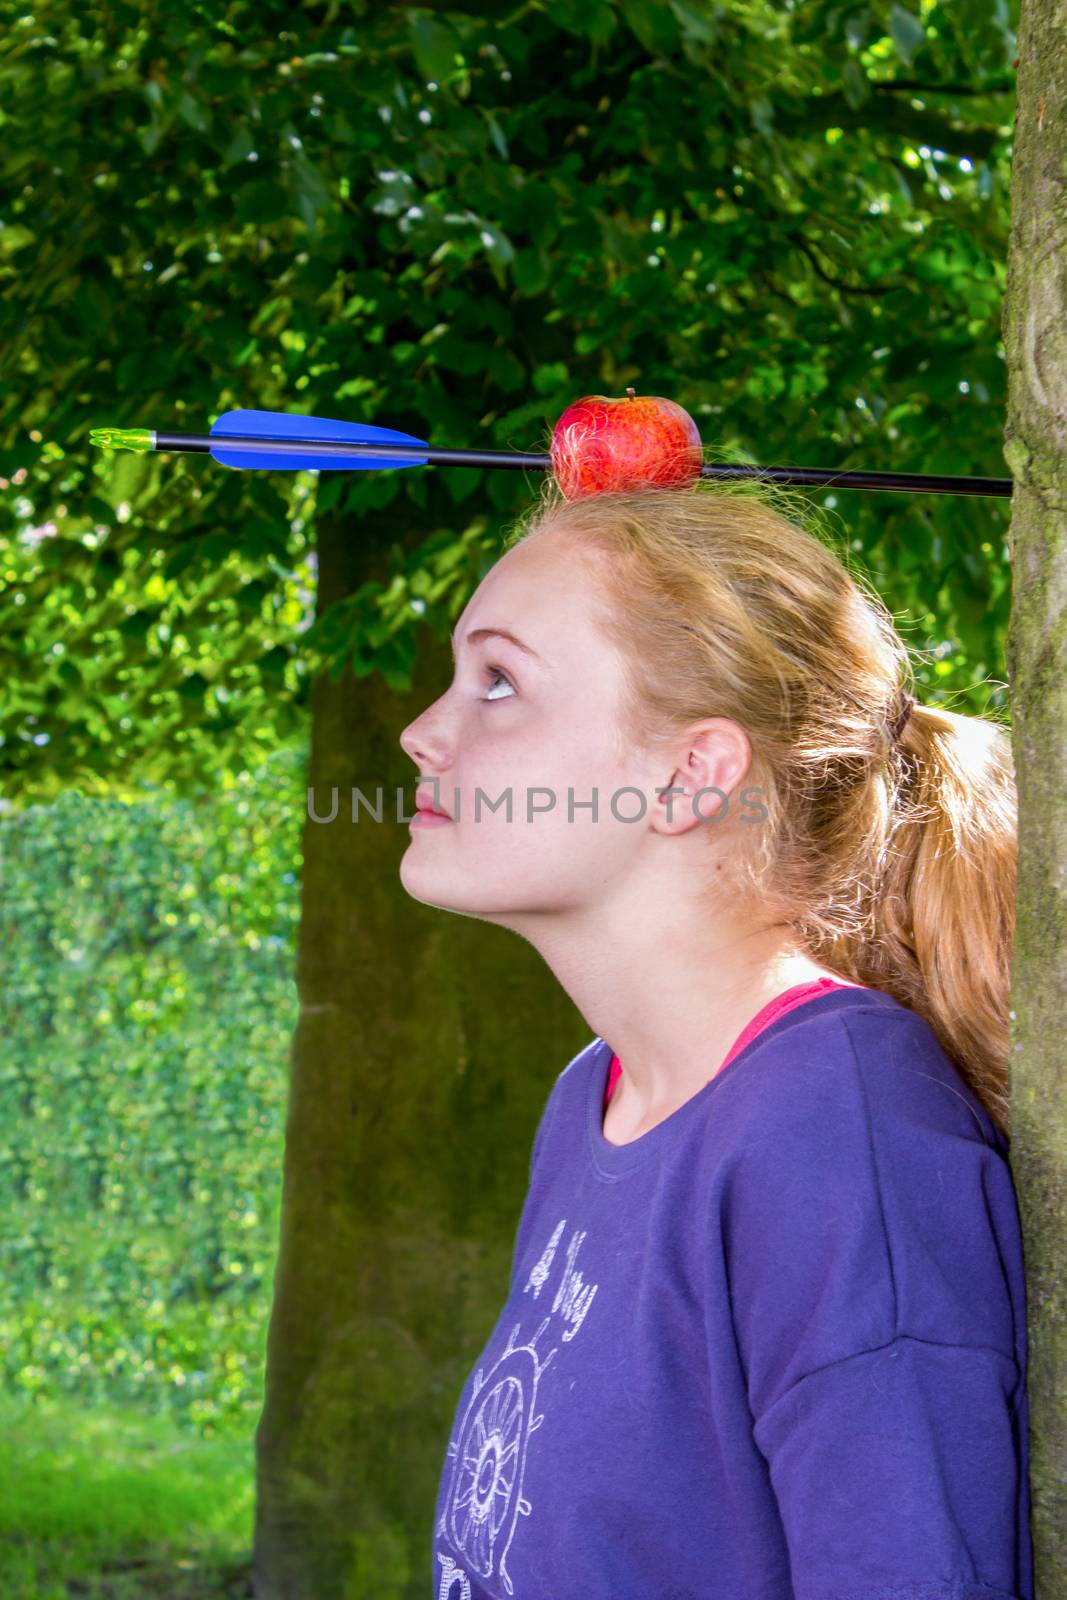 Girl with apple and arrow on her head standing outdoors